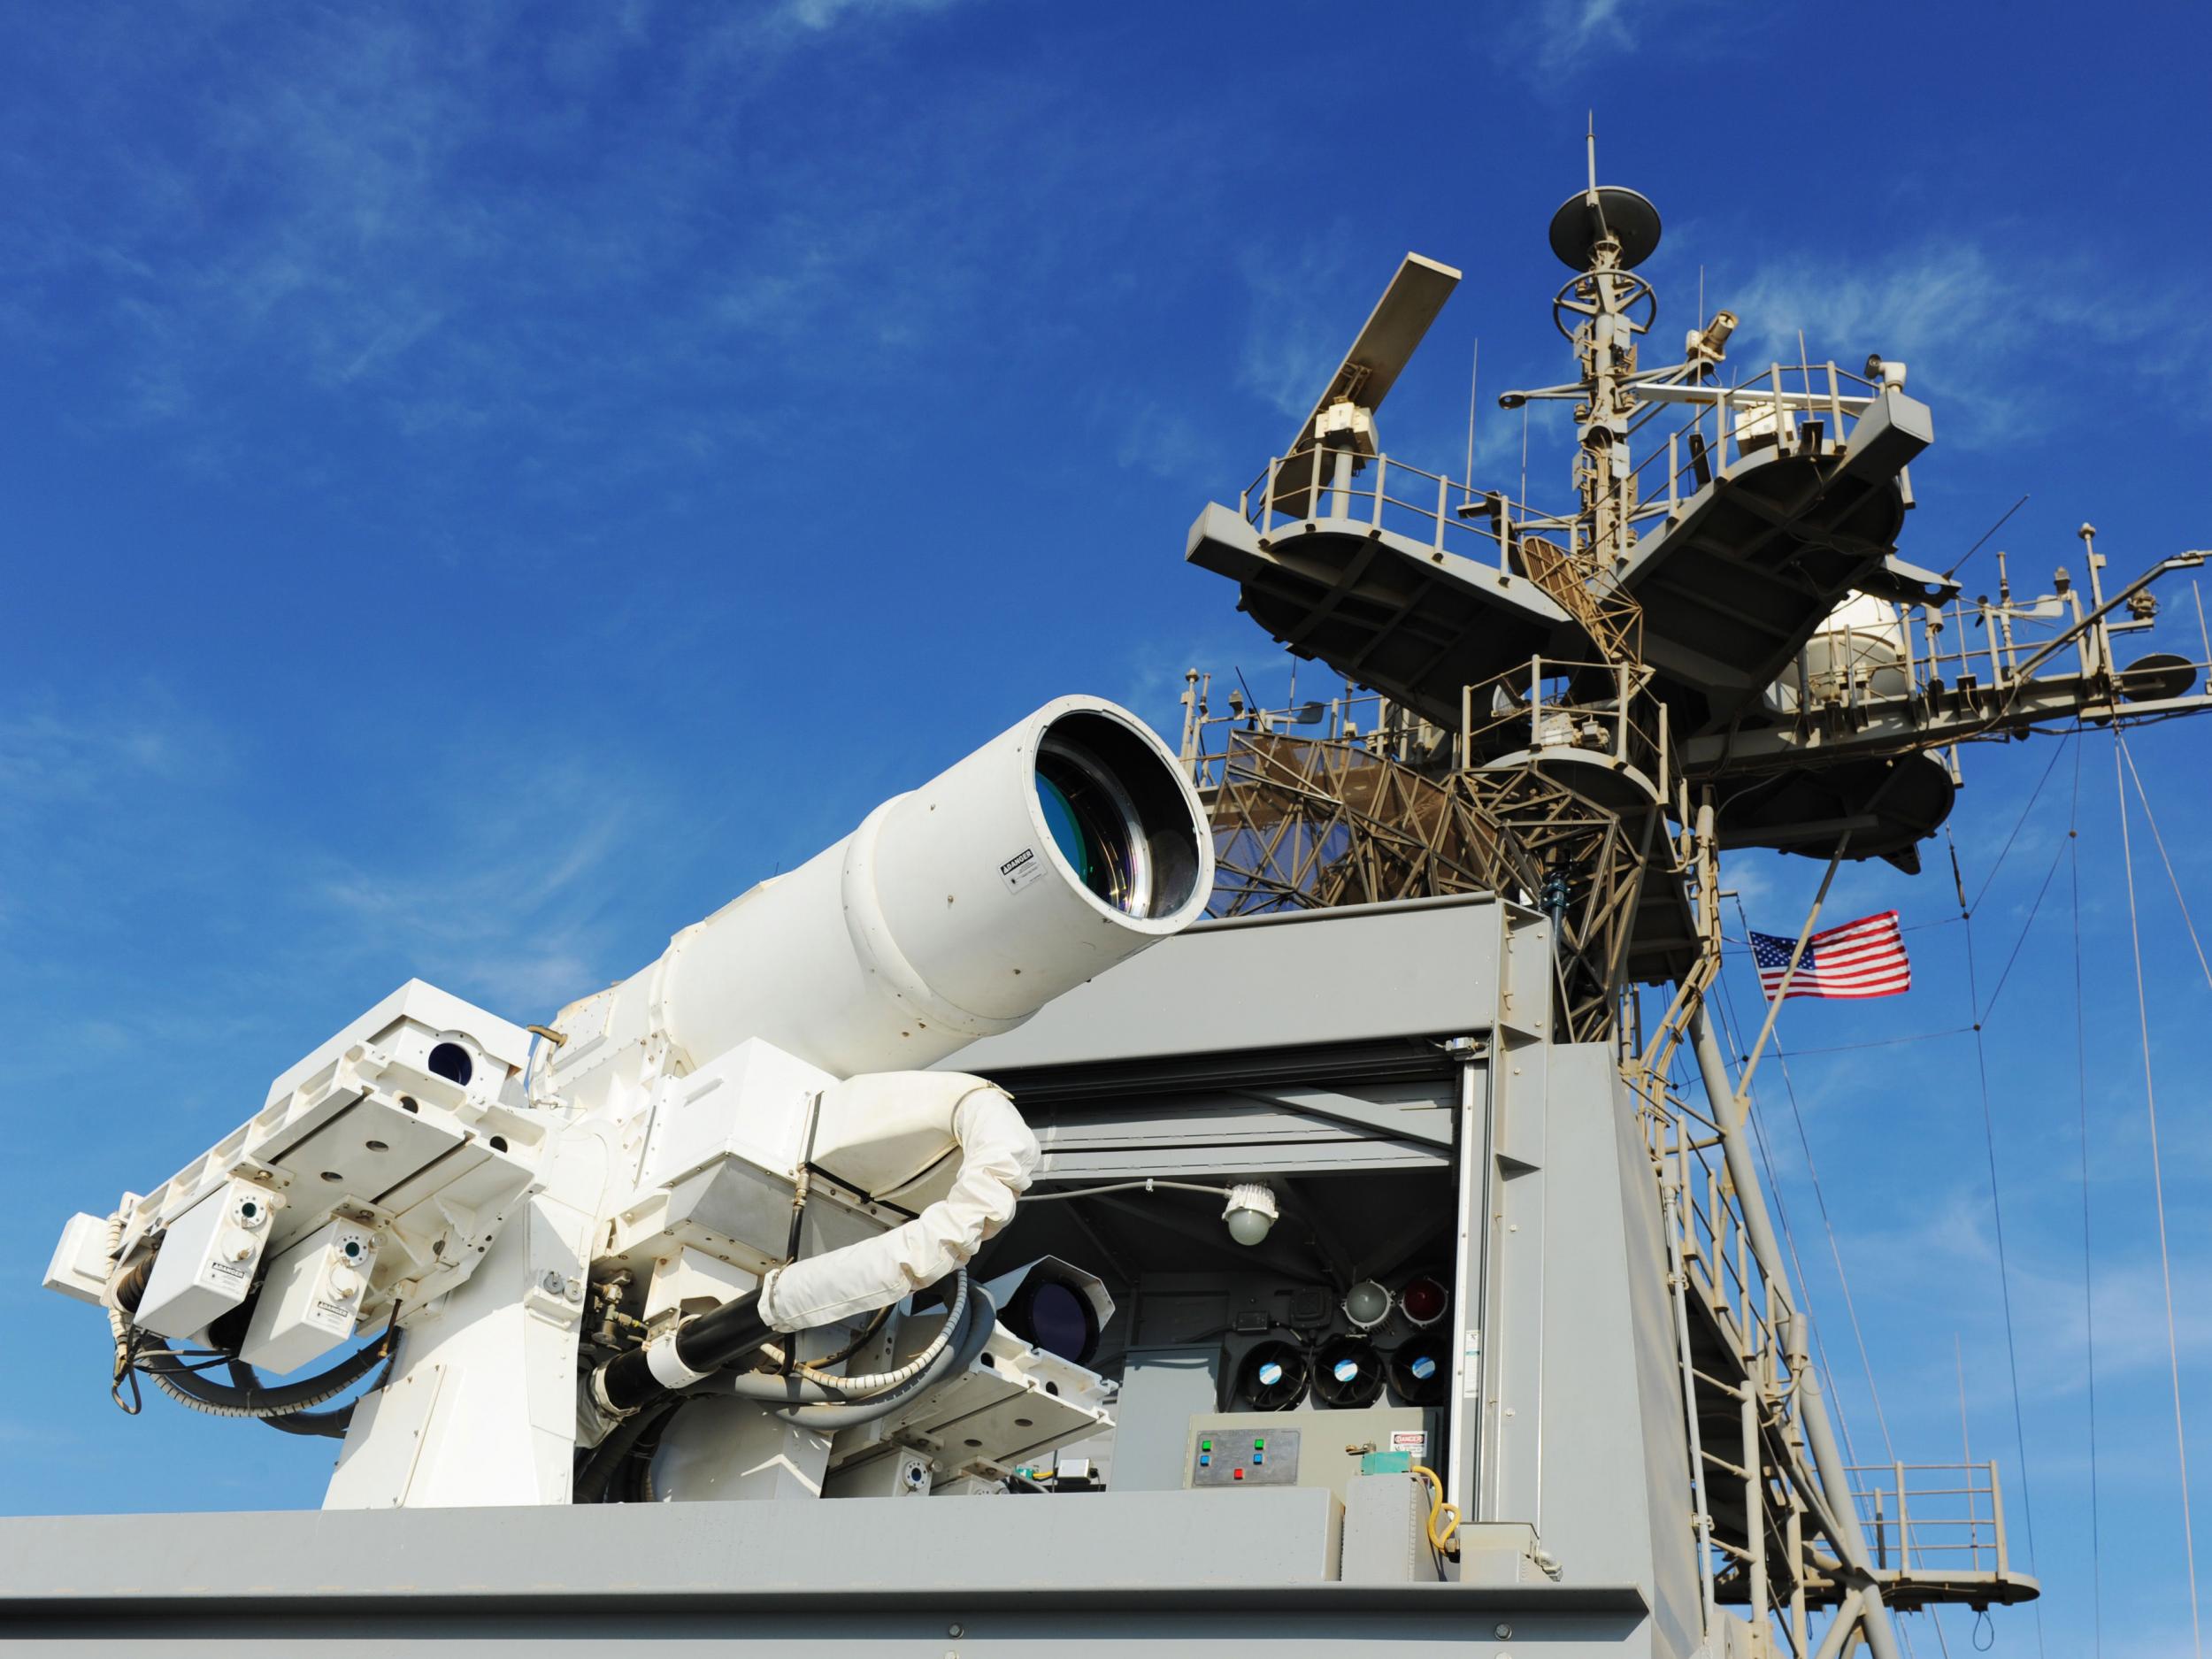 A laser weapon in place on the USS Ponce